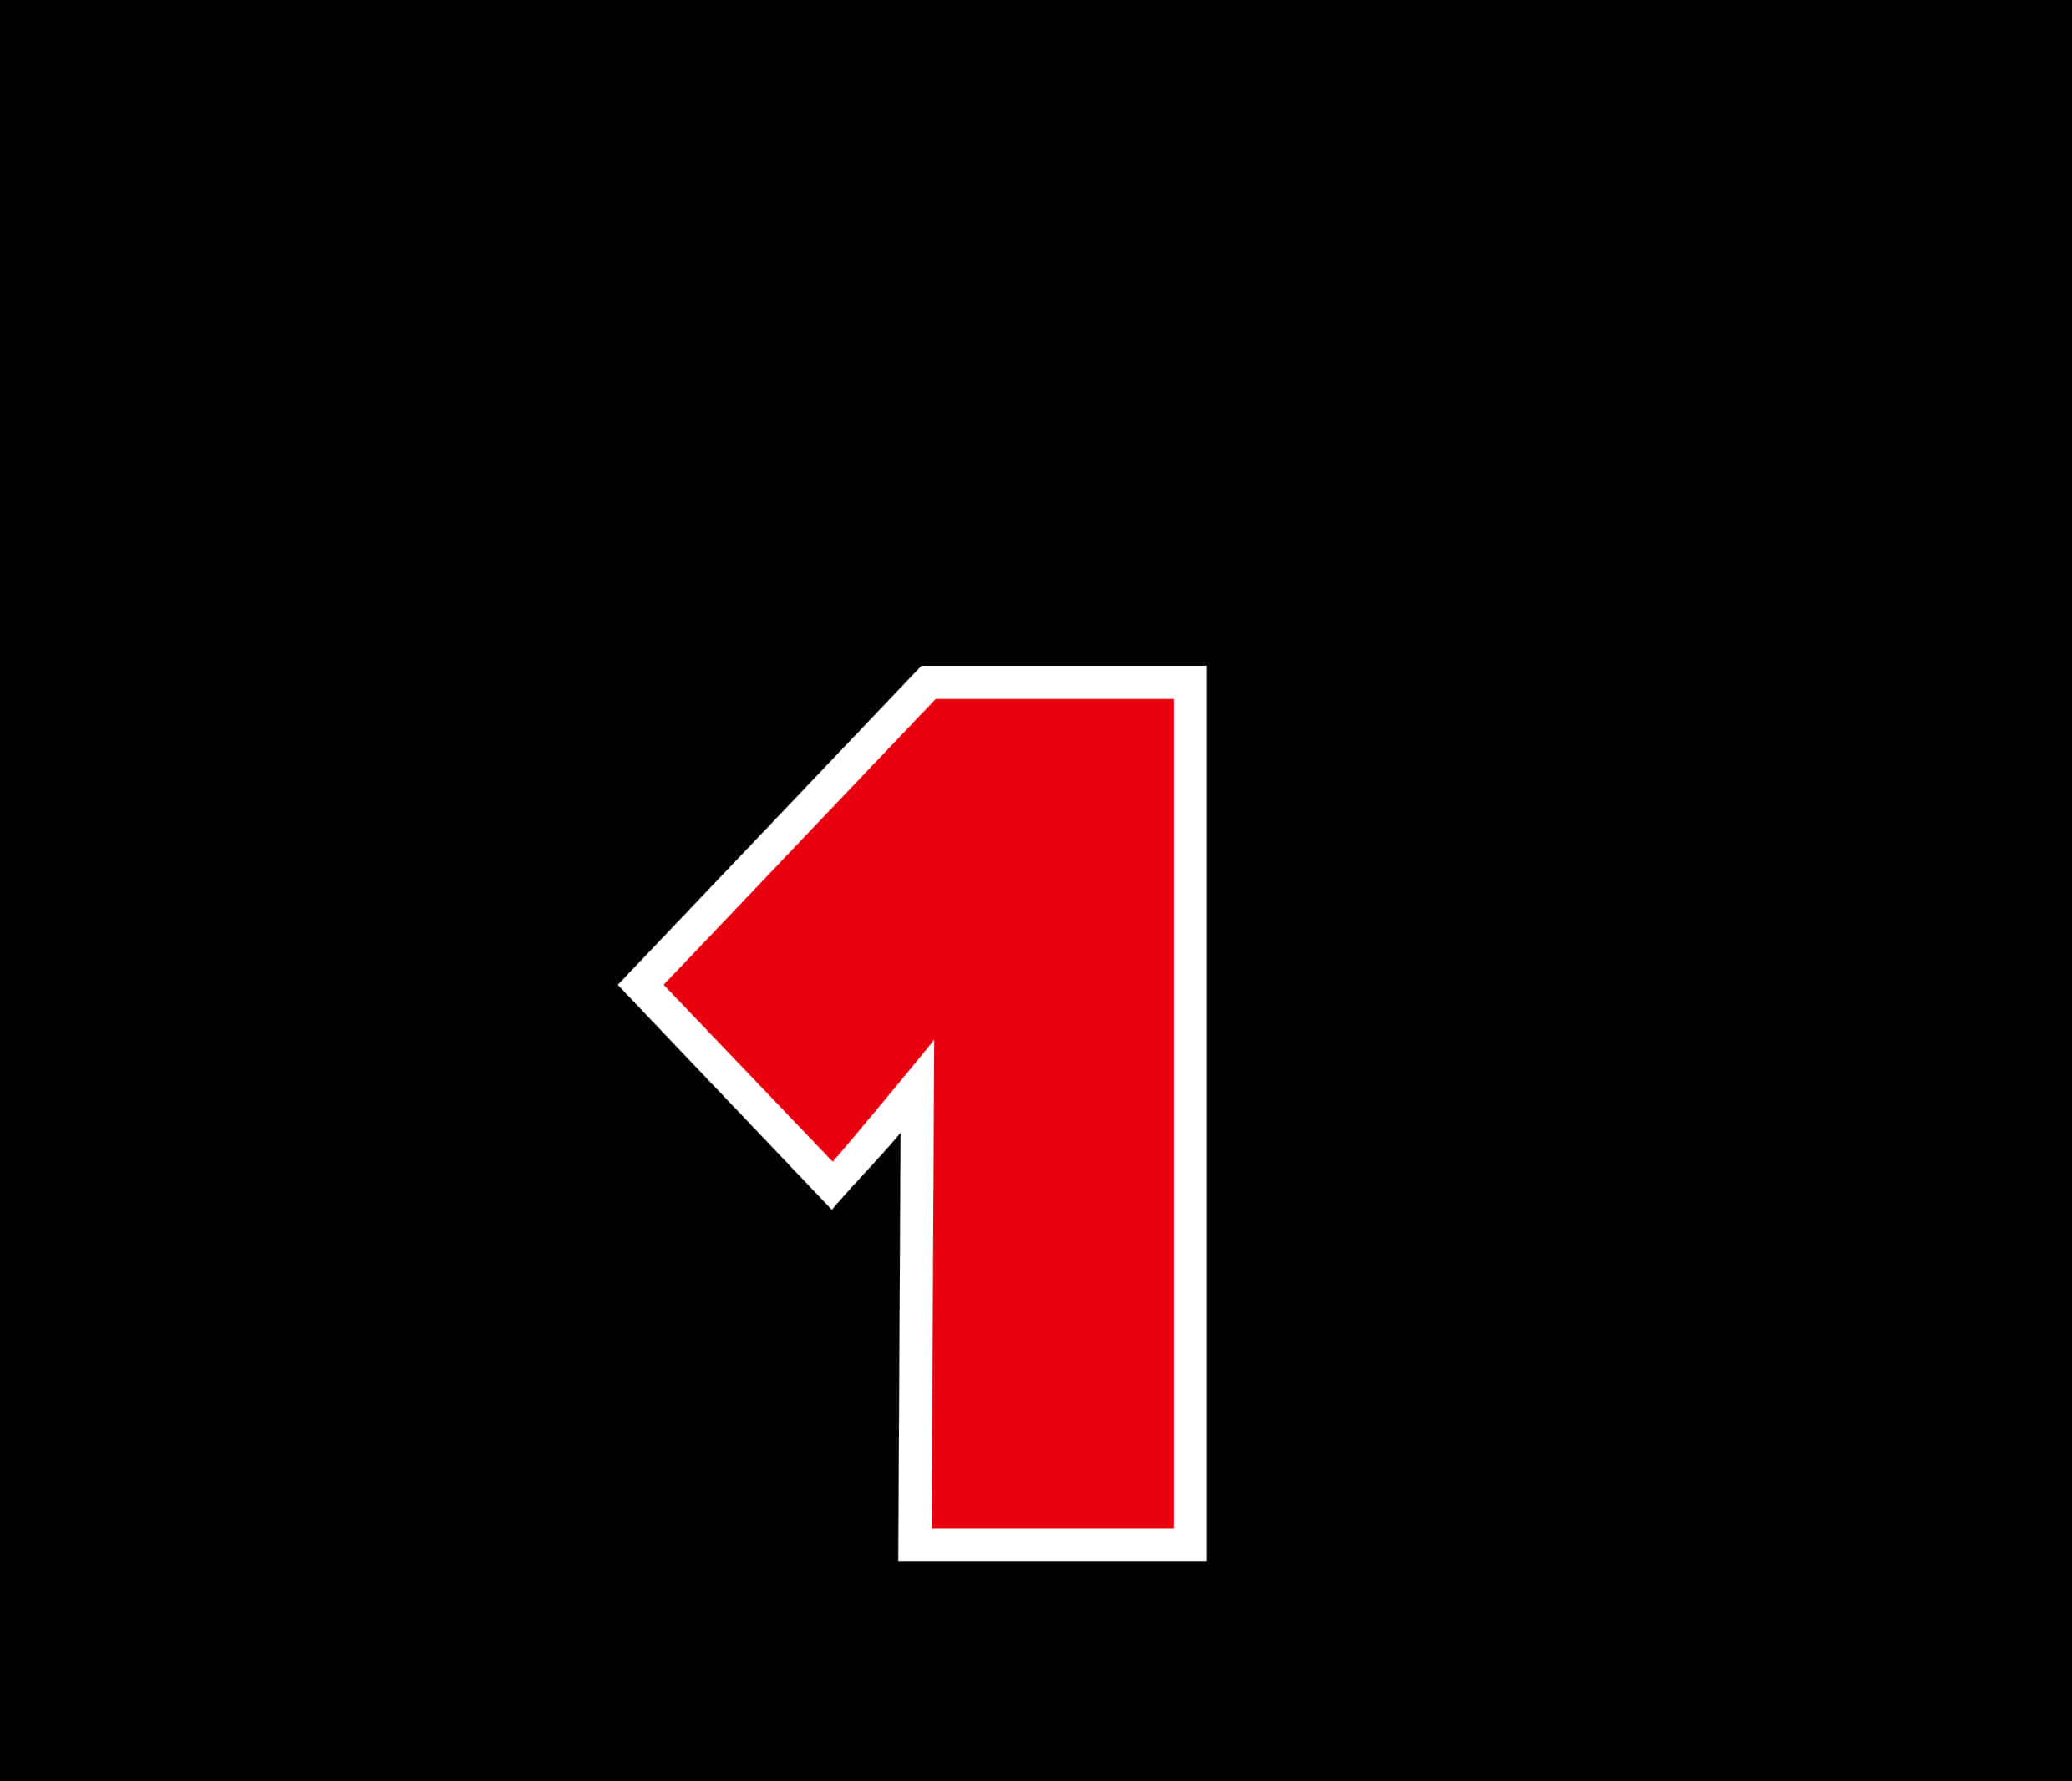 Red Number One Iconon Black Background